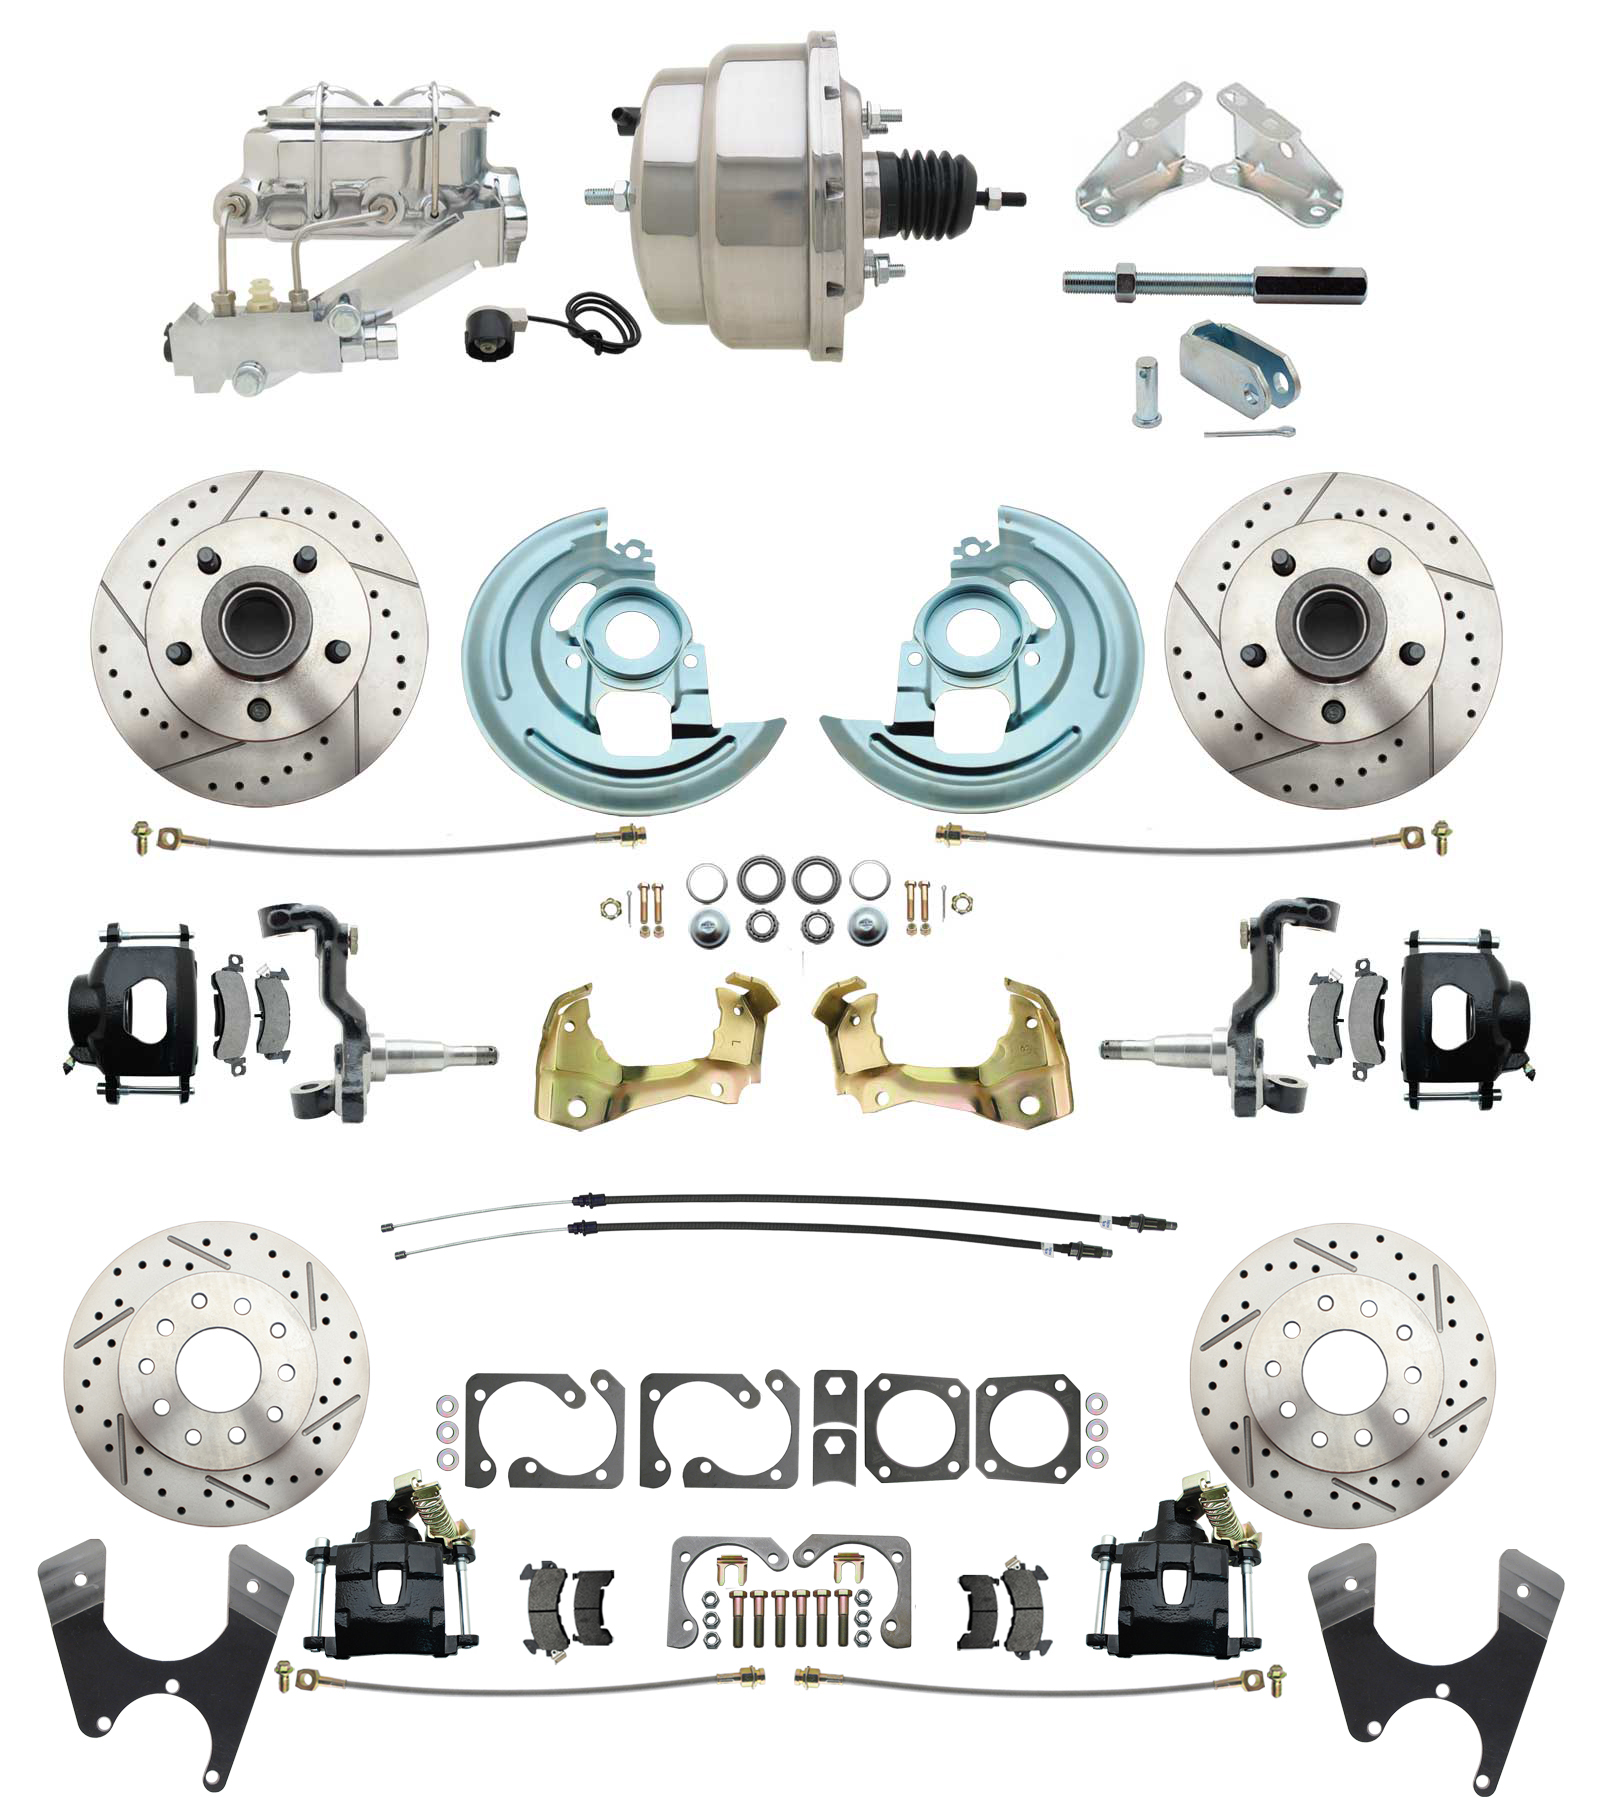 1967-1969 Camaro/ Firebird & 1968-1974 Chevy Nova Front & Rear Power Disc Brake Conversion Kit Drilled & Slotted & Powder Coated Black Calipers Rotors W/ 8 Dual Chrome Booster Kit